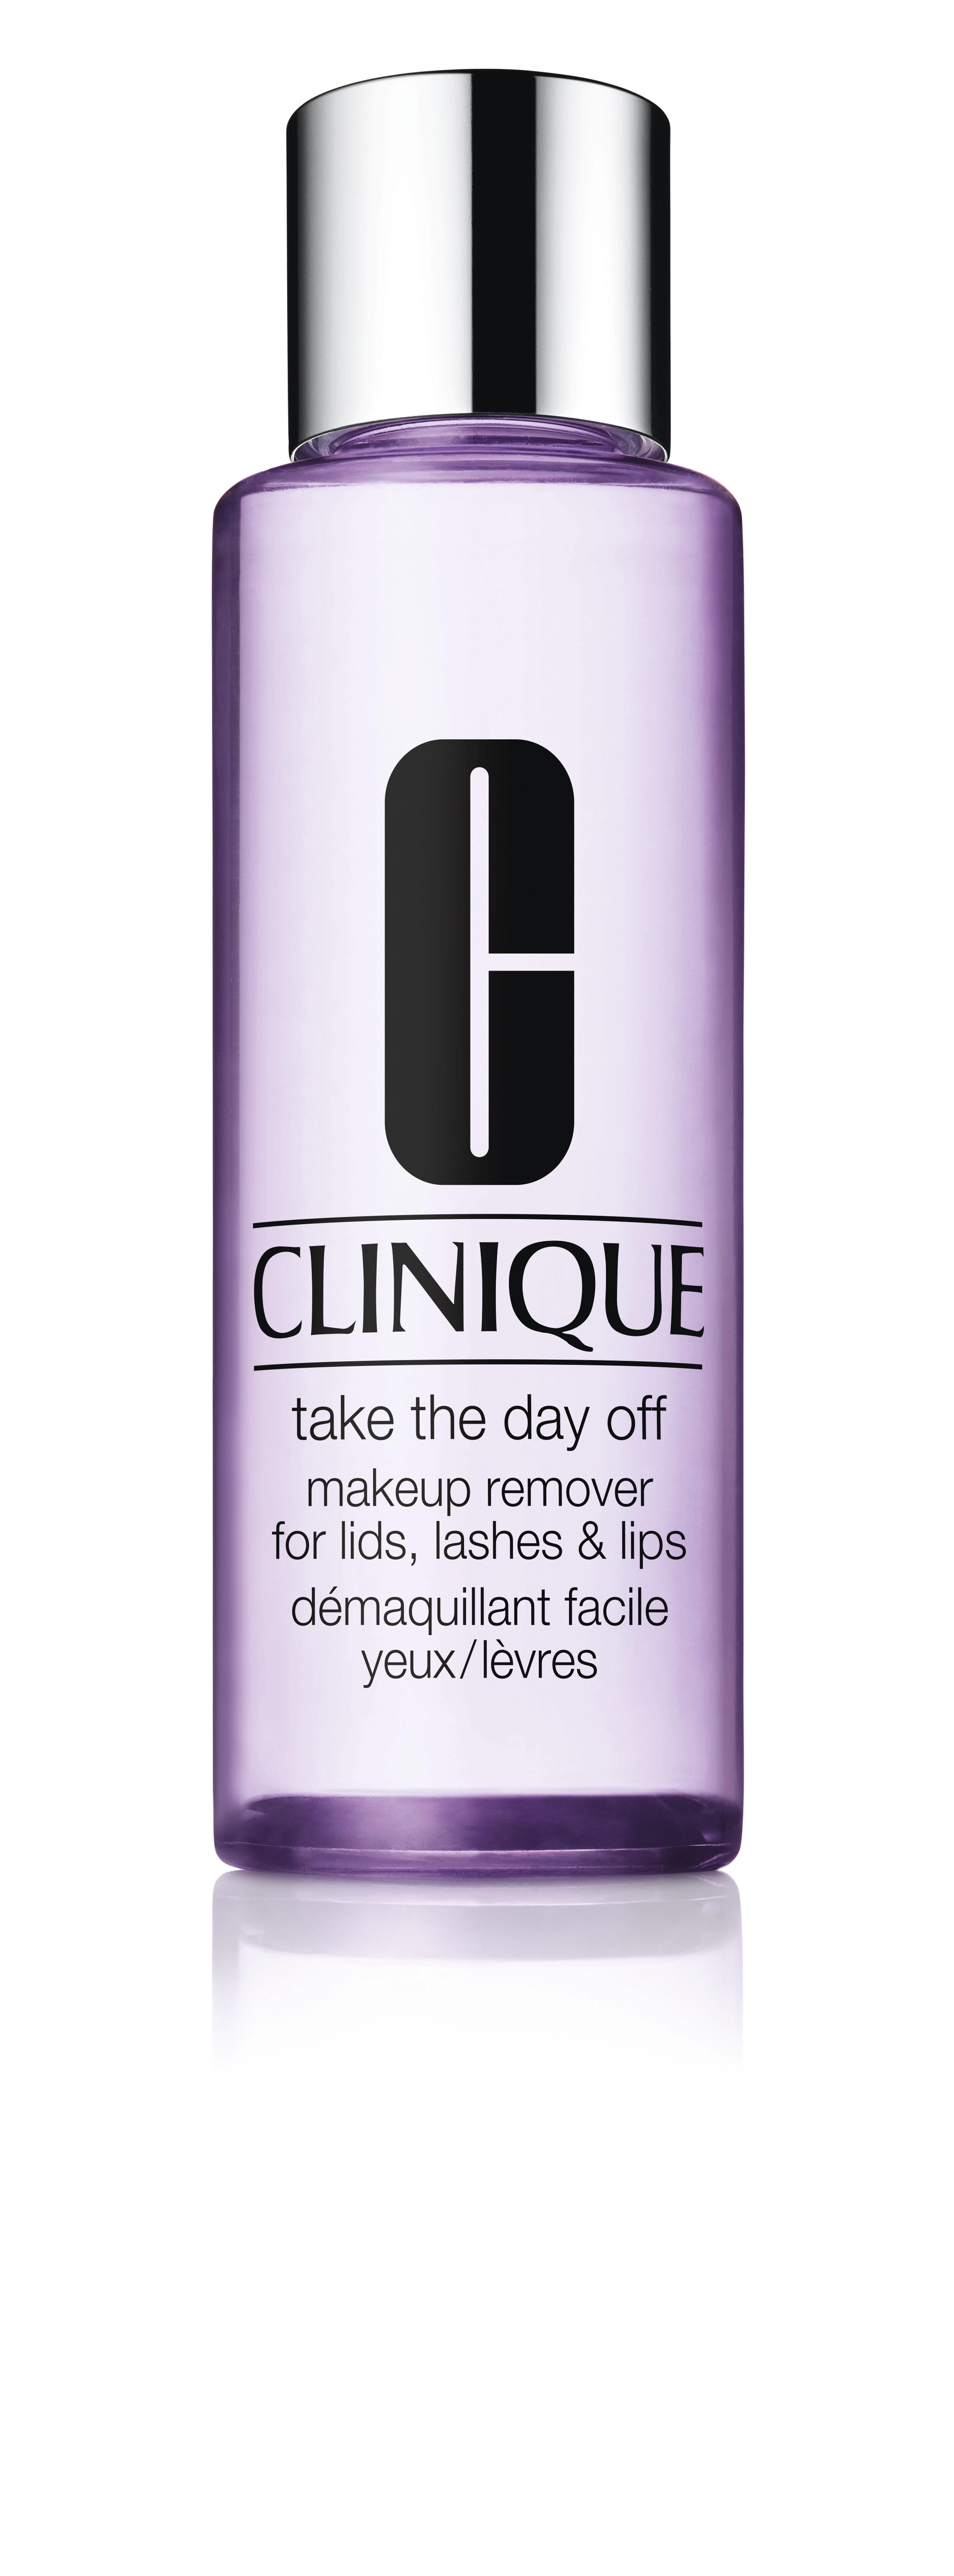 Clinique Take The Day Off Makeup Remover 1